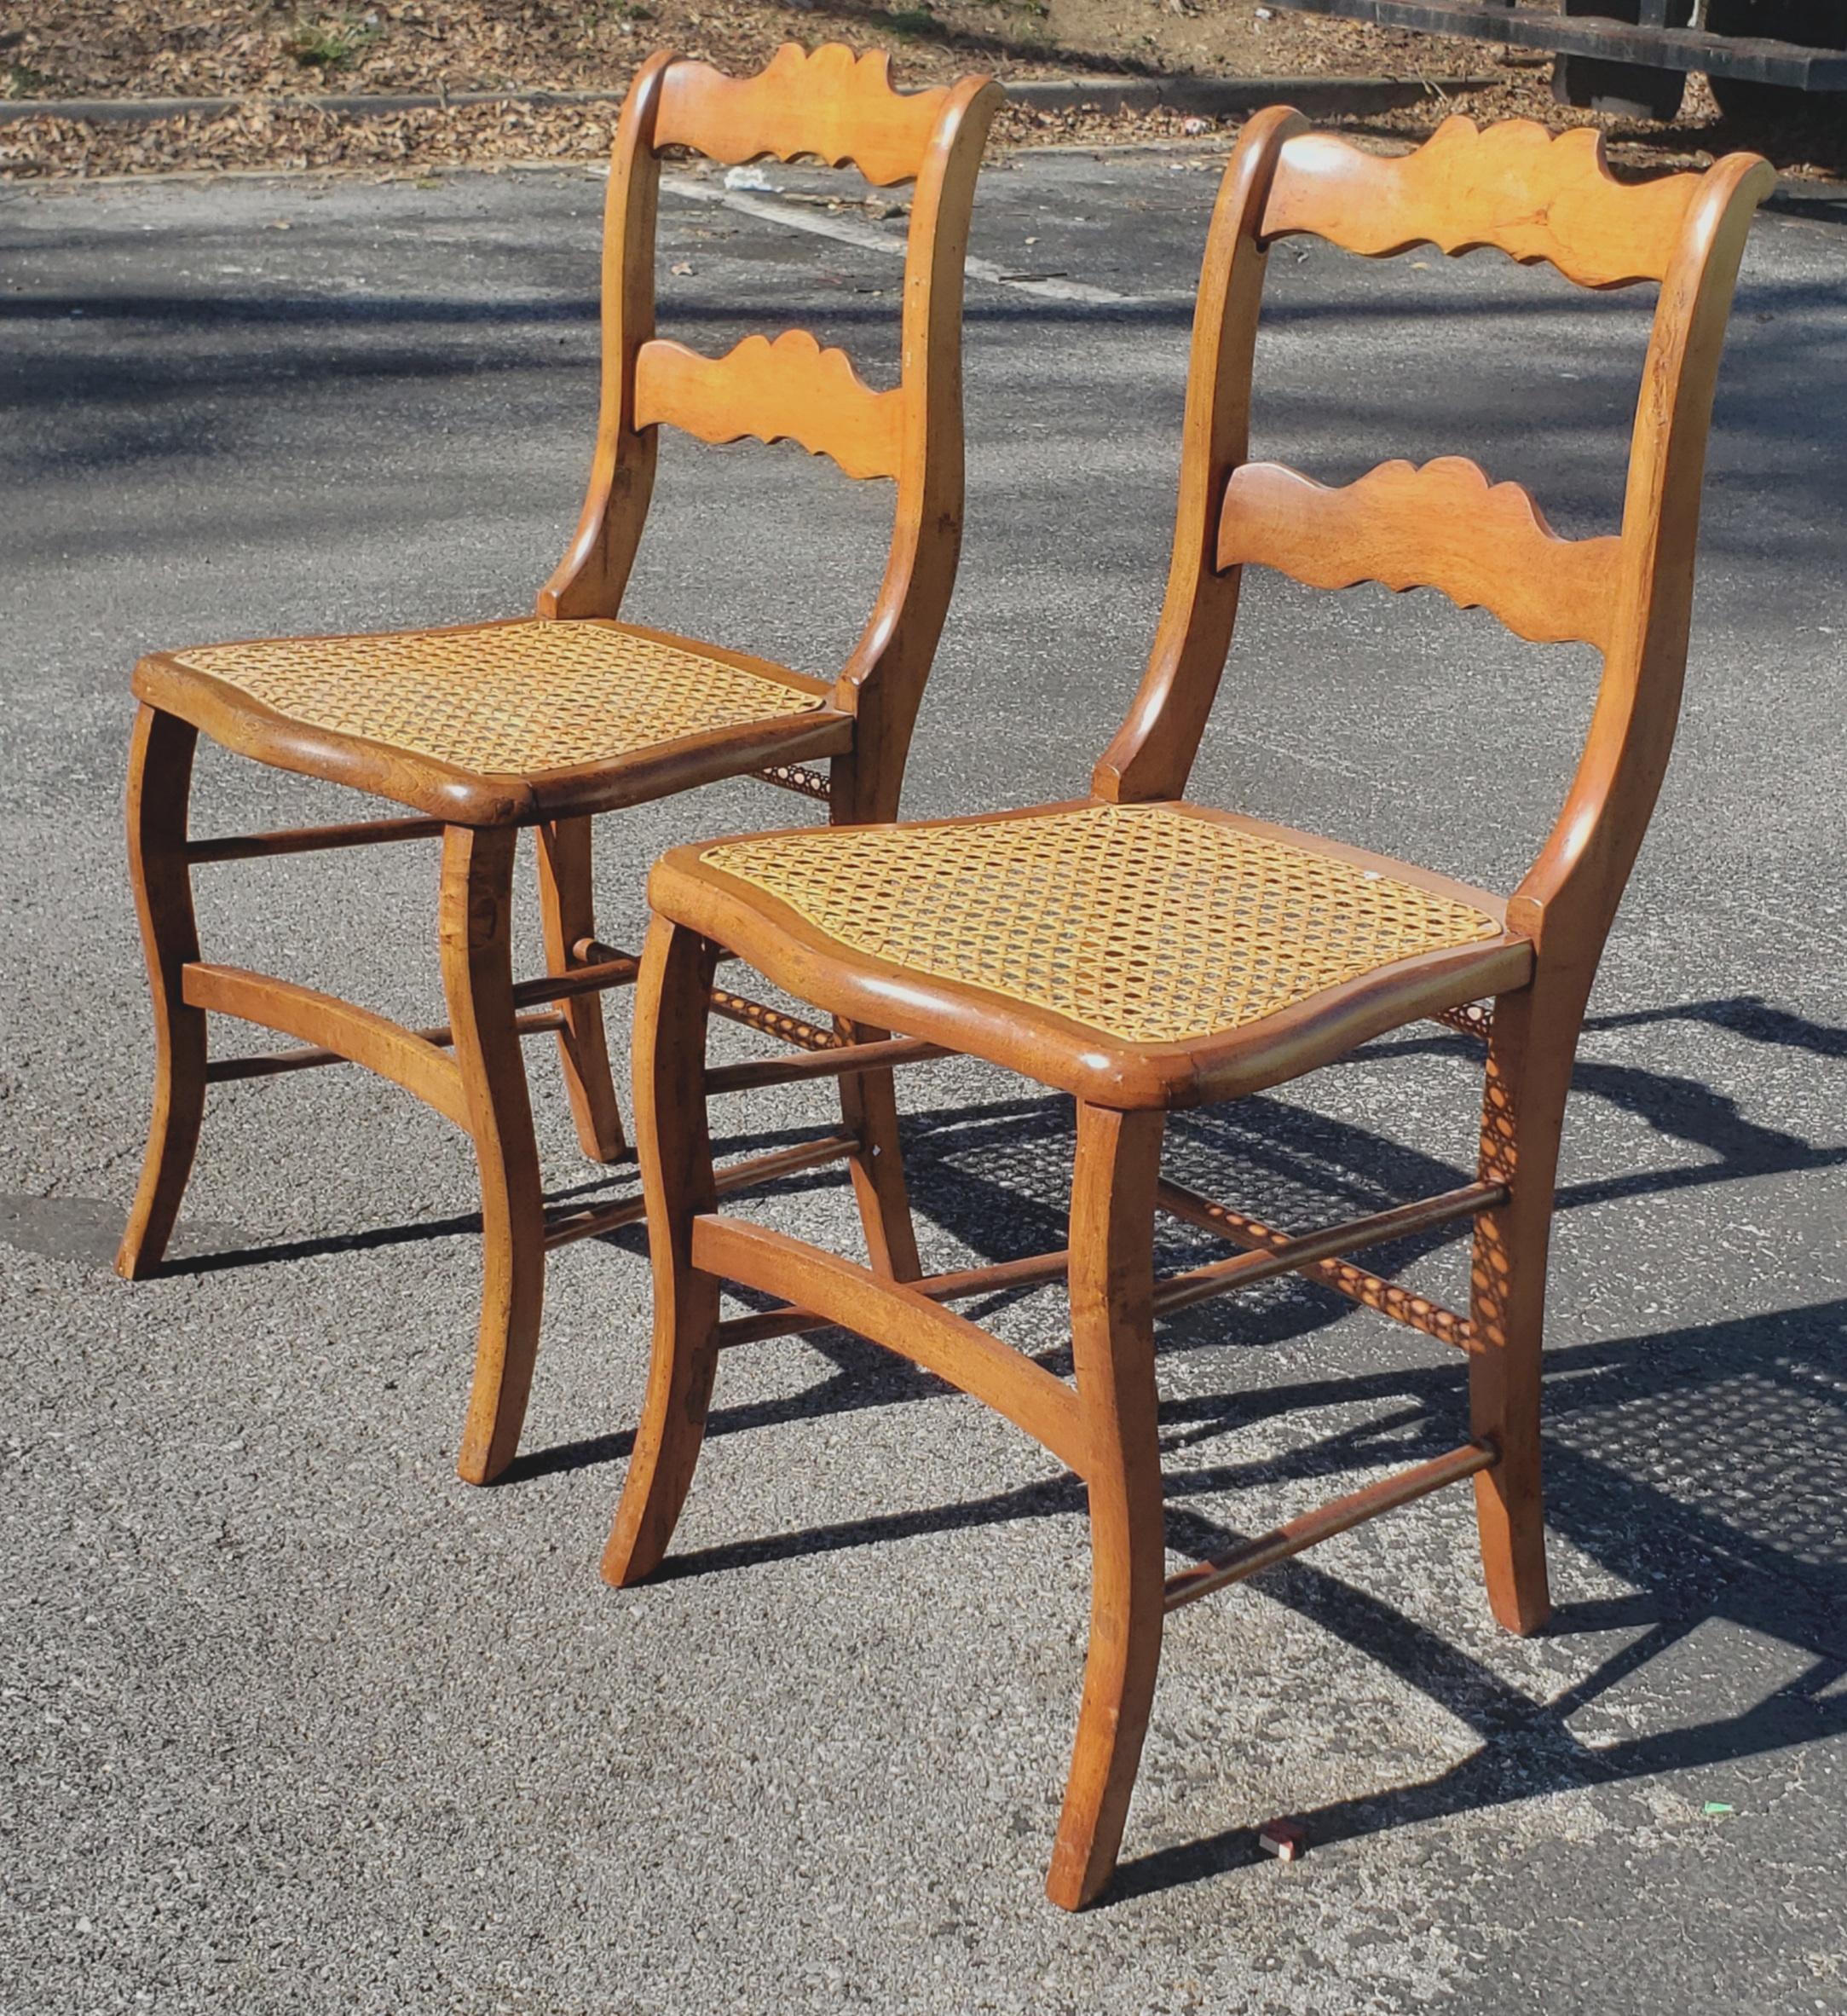 A pair Victorian early American ladder back maple and cane seat chairs, circa 1880s with newer refinishing and recent cane seats. Measures 17